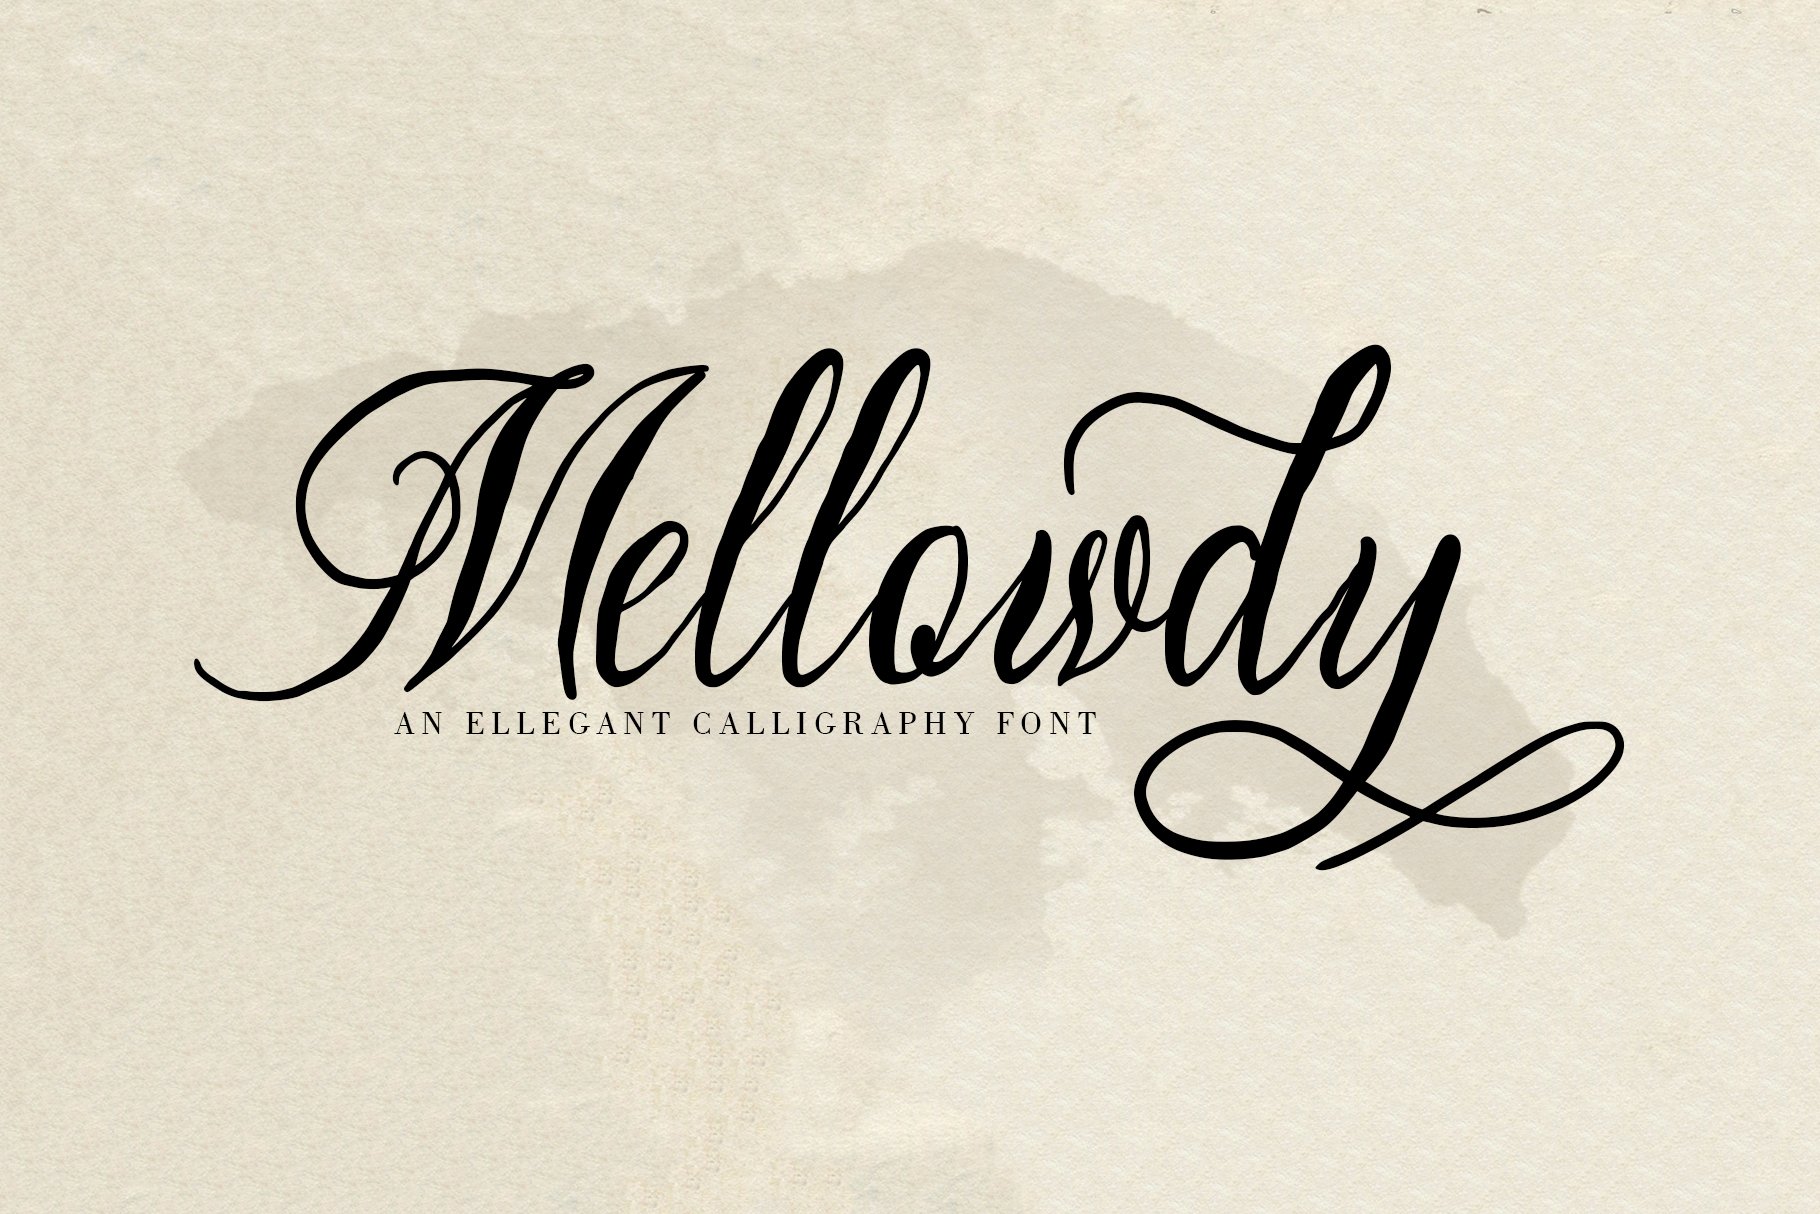 Mellowdy | A Calligraphy Script Font cover image.